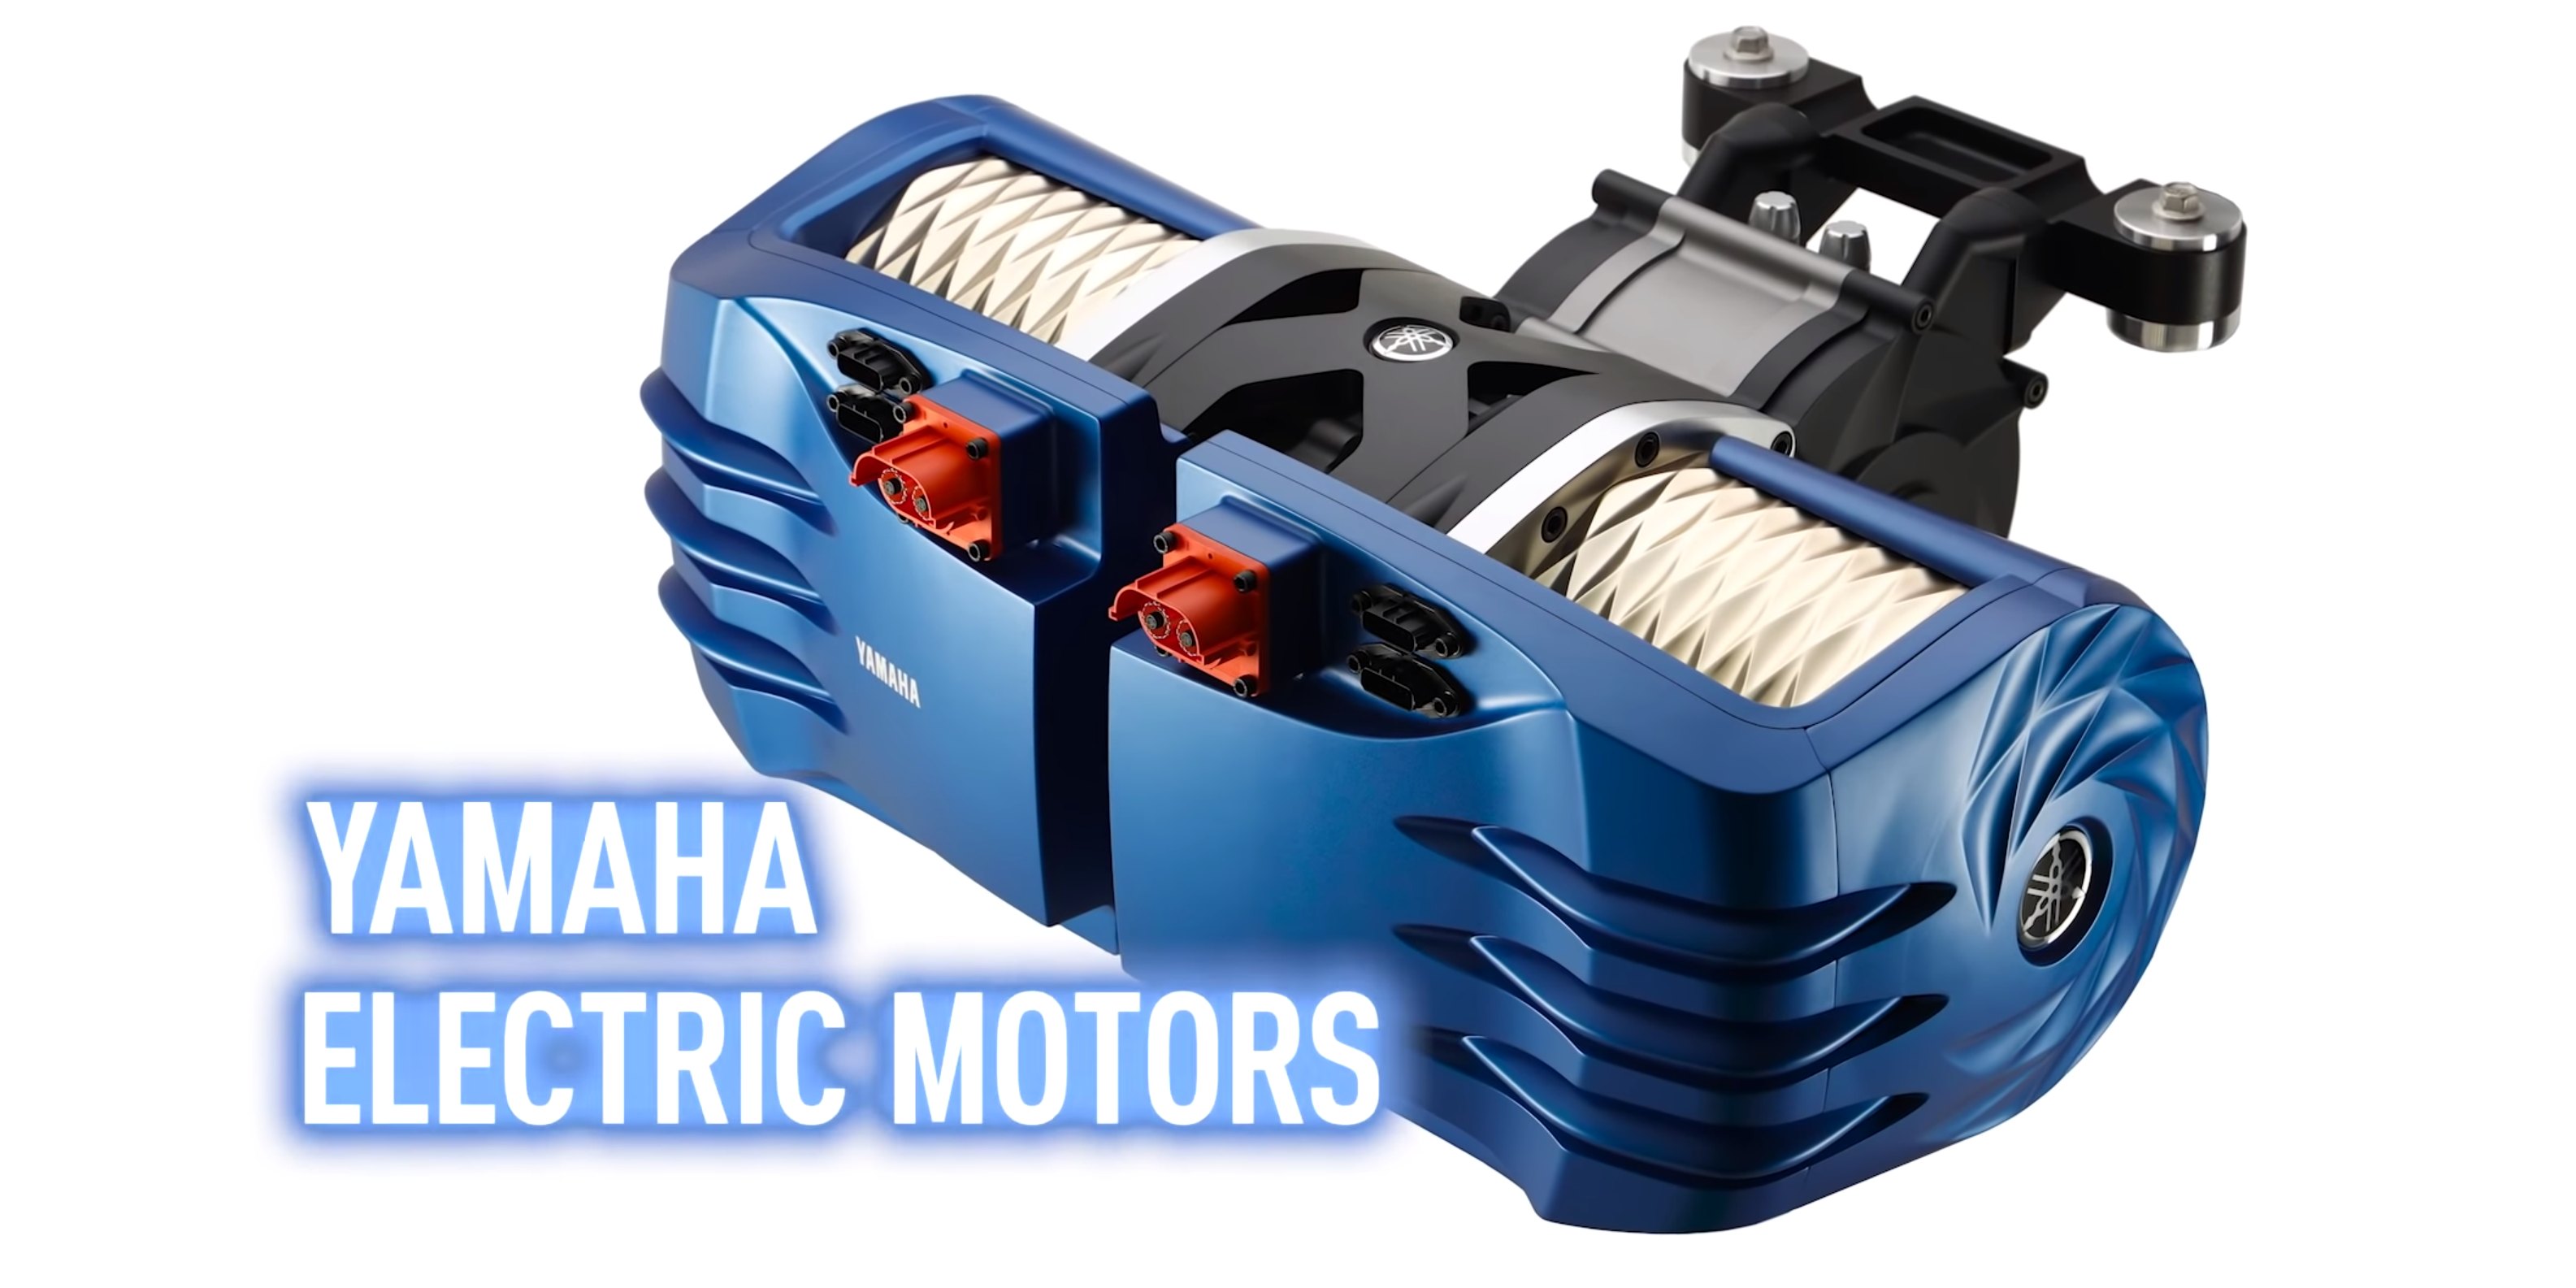 yamaha extremely pact electric motors electric motorcycles cars